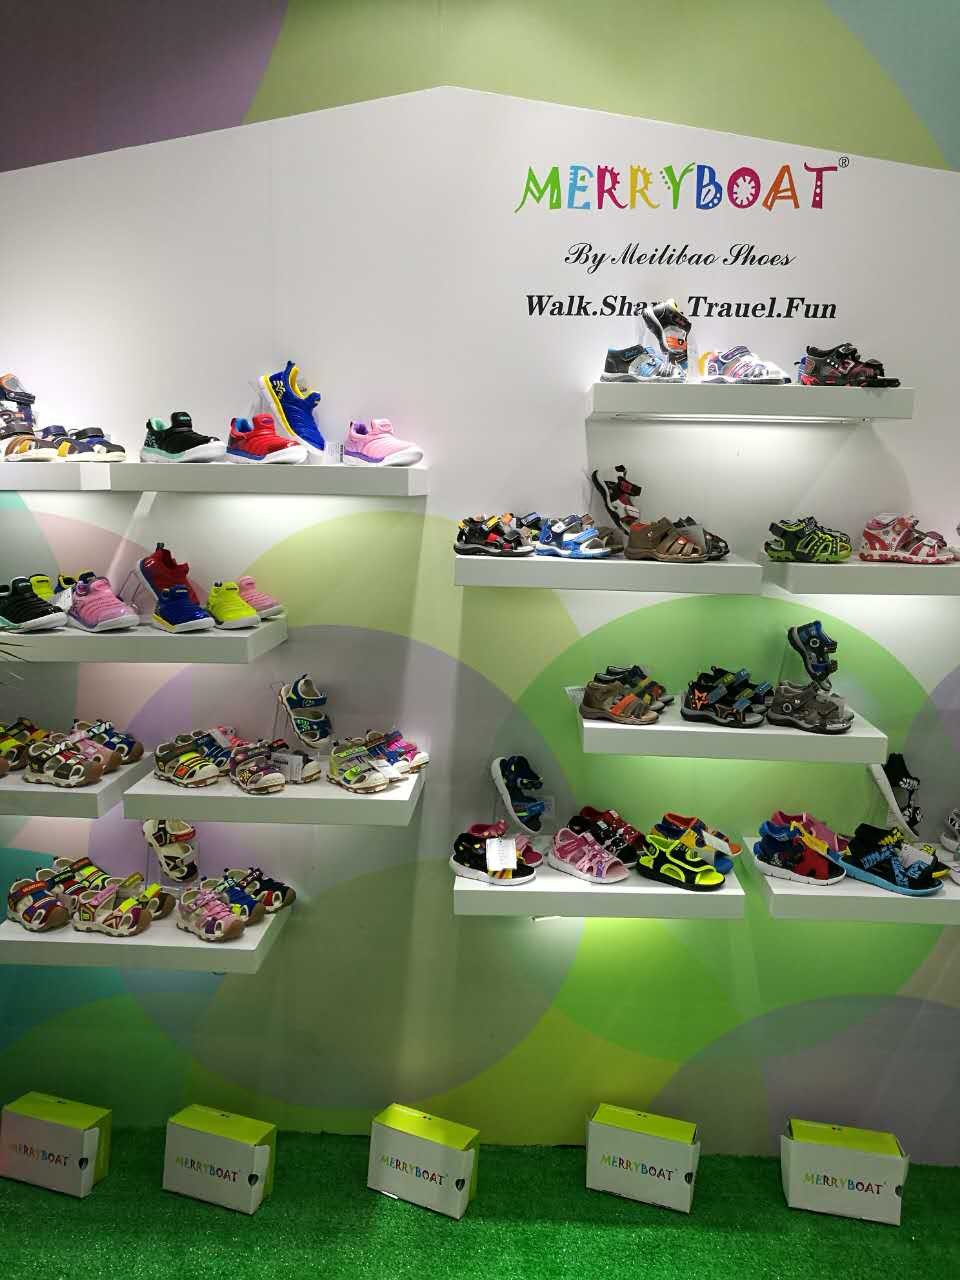 merryboat's products